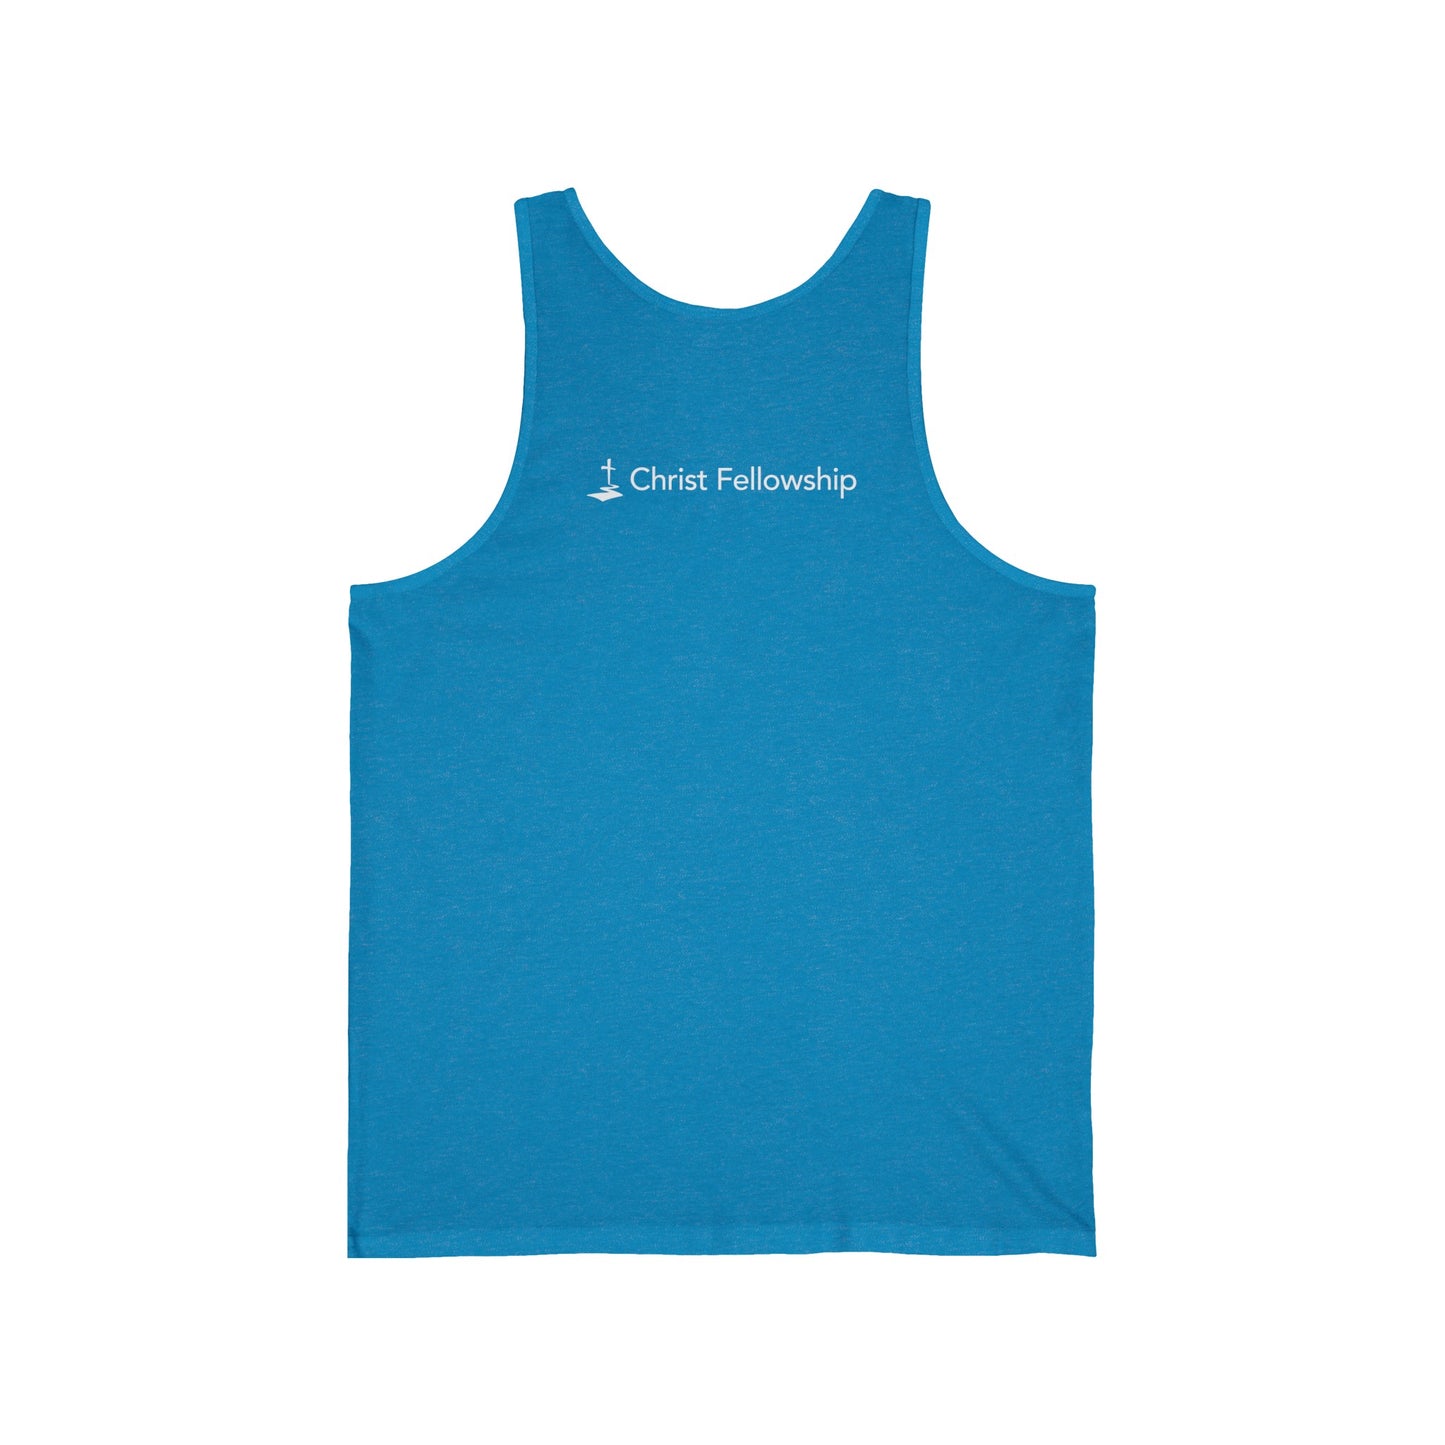 Be Part of the Story English Jersey Tank